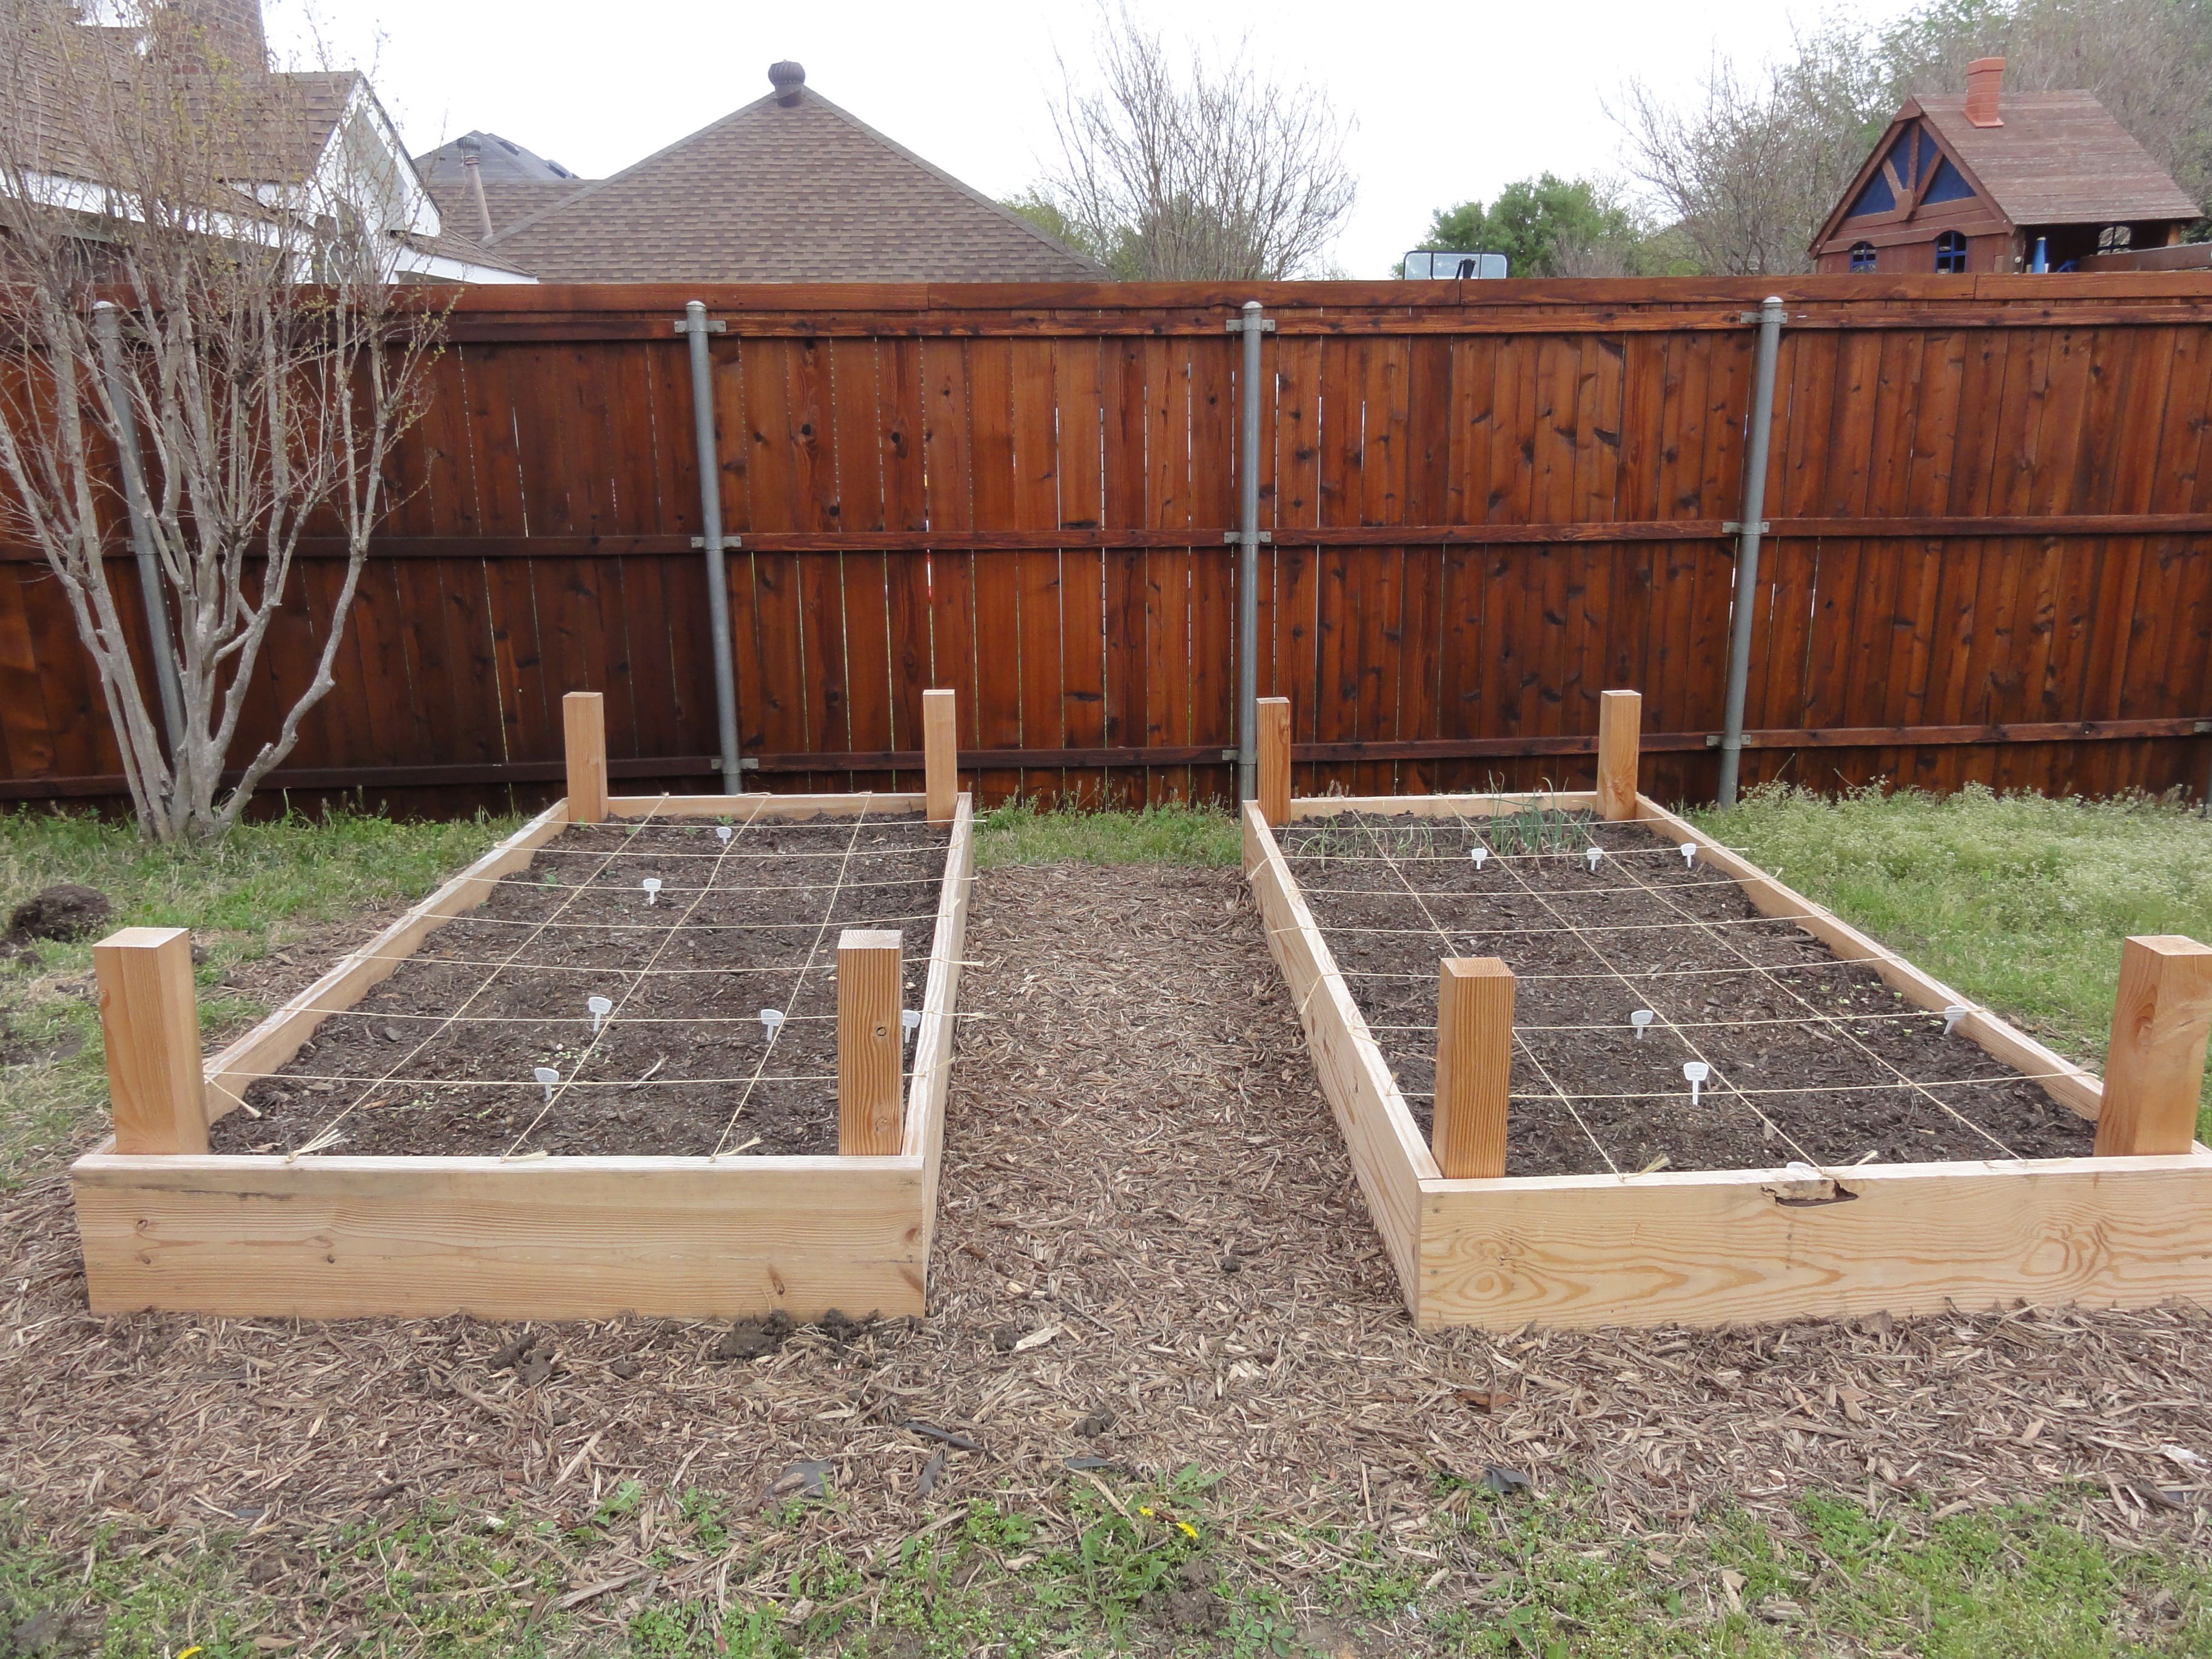 Our Spring Squarefoot Garden Plans